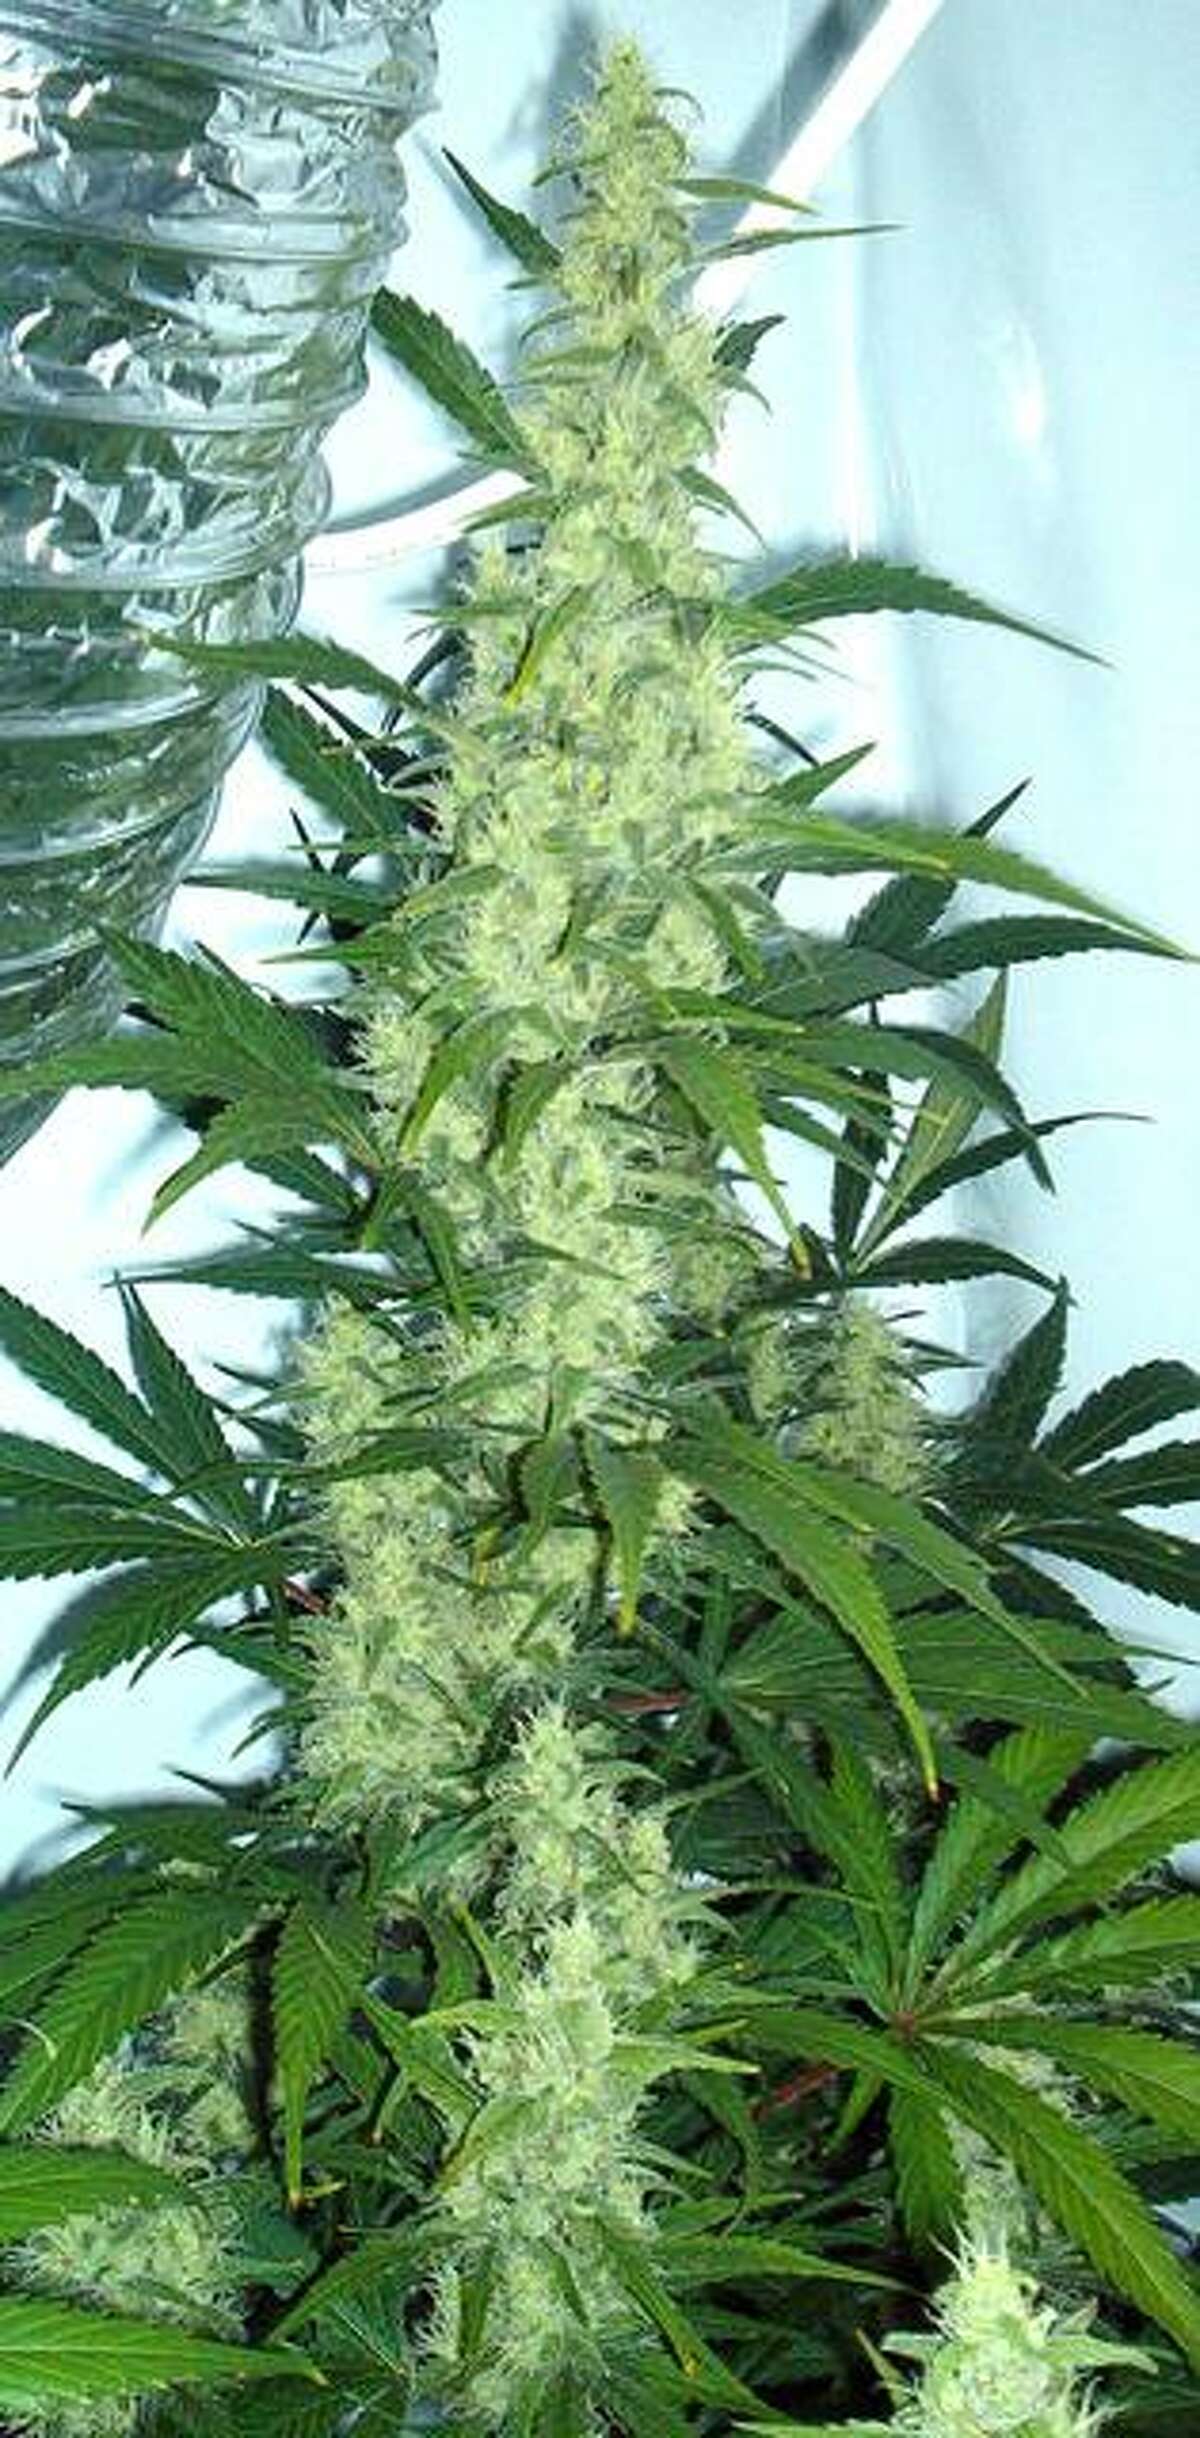 Wikipedia Commons/copyright free Mainbud of a "Northern lights" after 58 days of flowering. It is growing under 400W sodiumlamp.